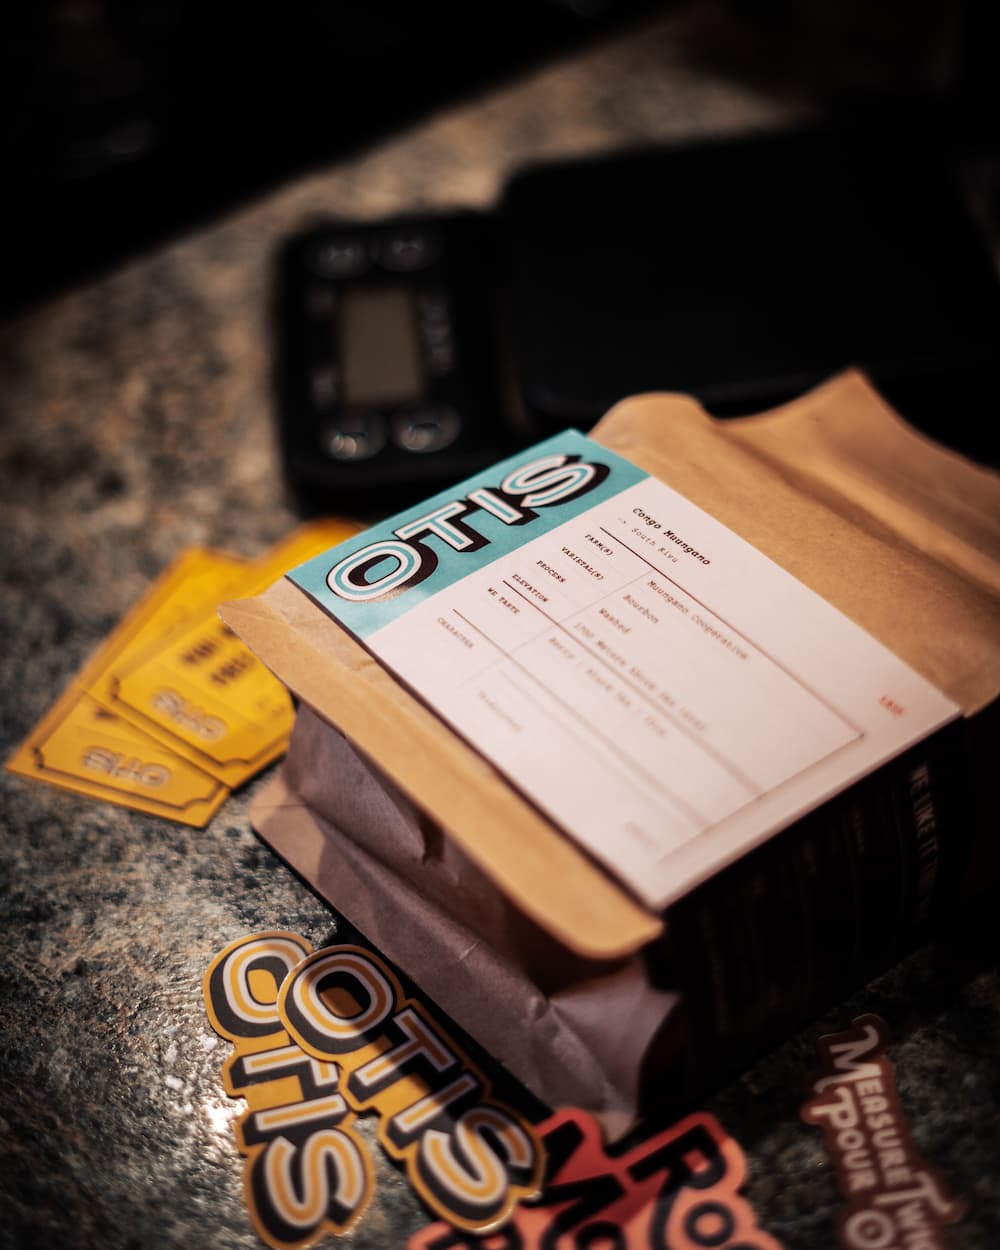 Single origin specialty coffee from OTIS with free drink cards and stickers on a counter next to a scale